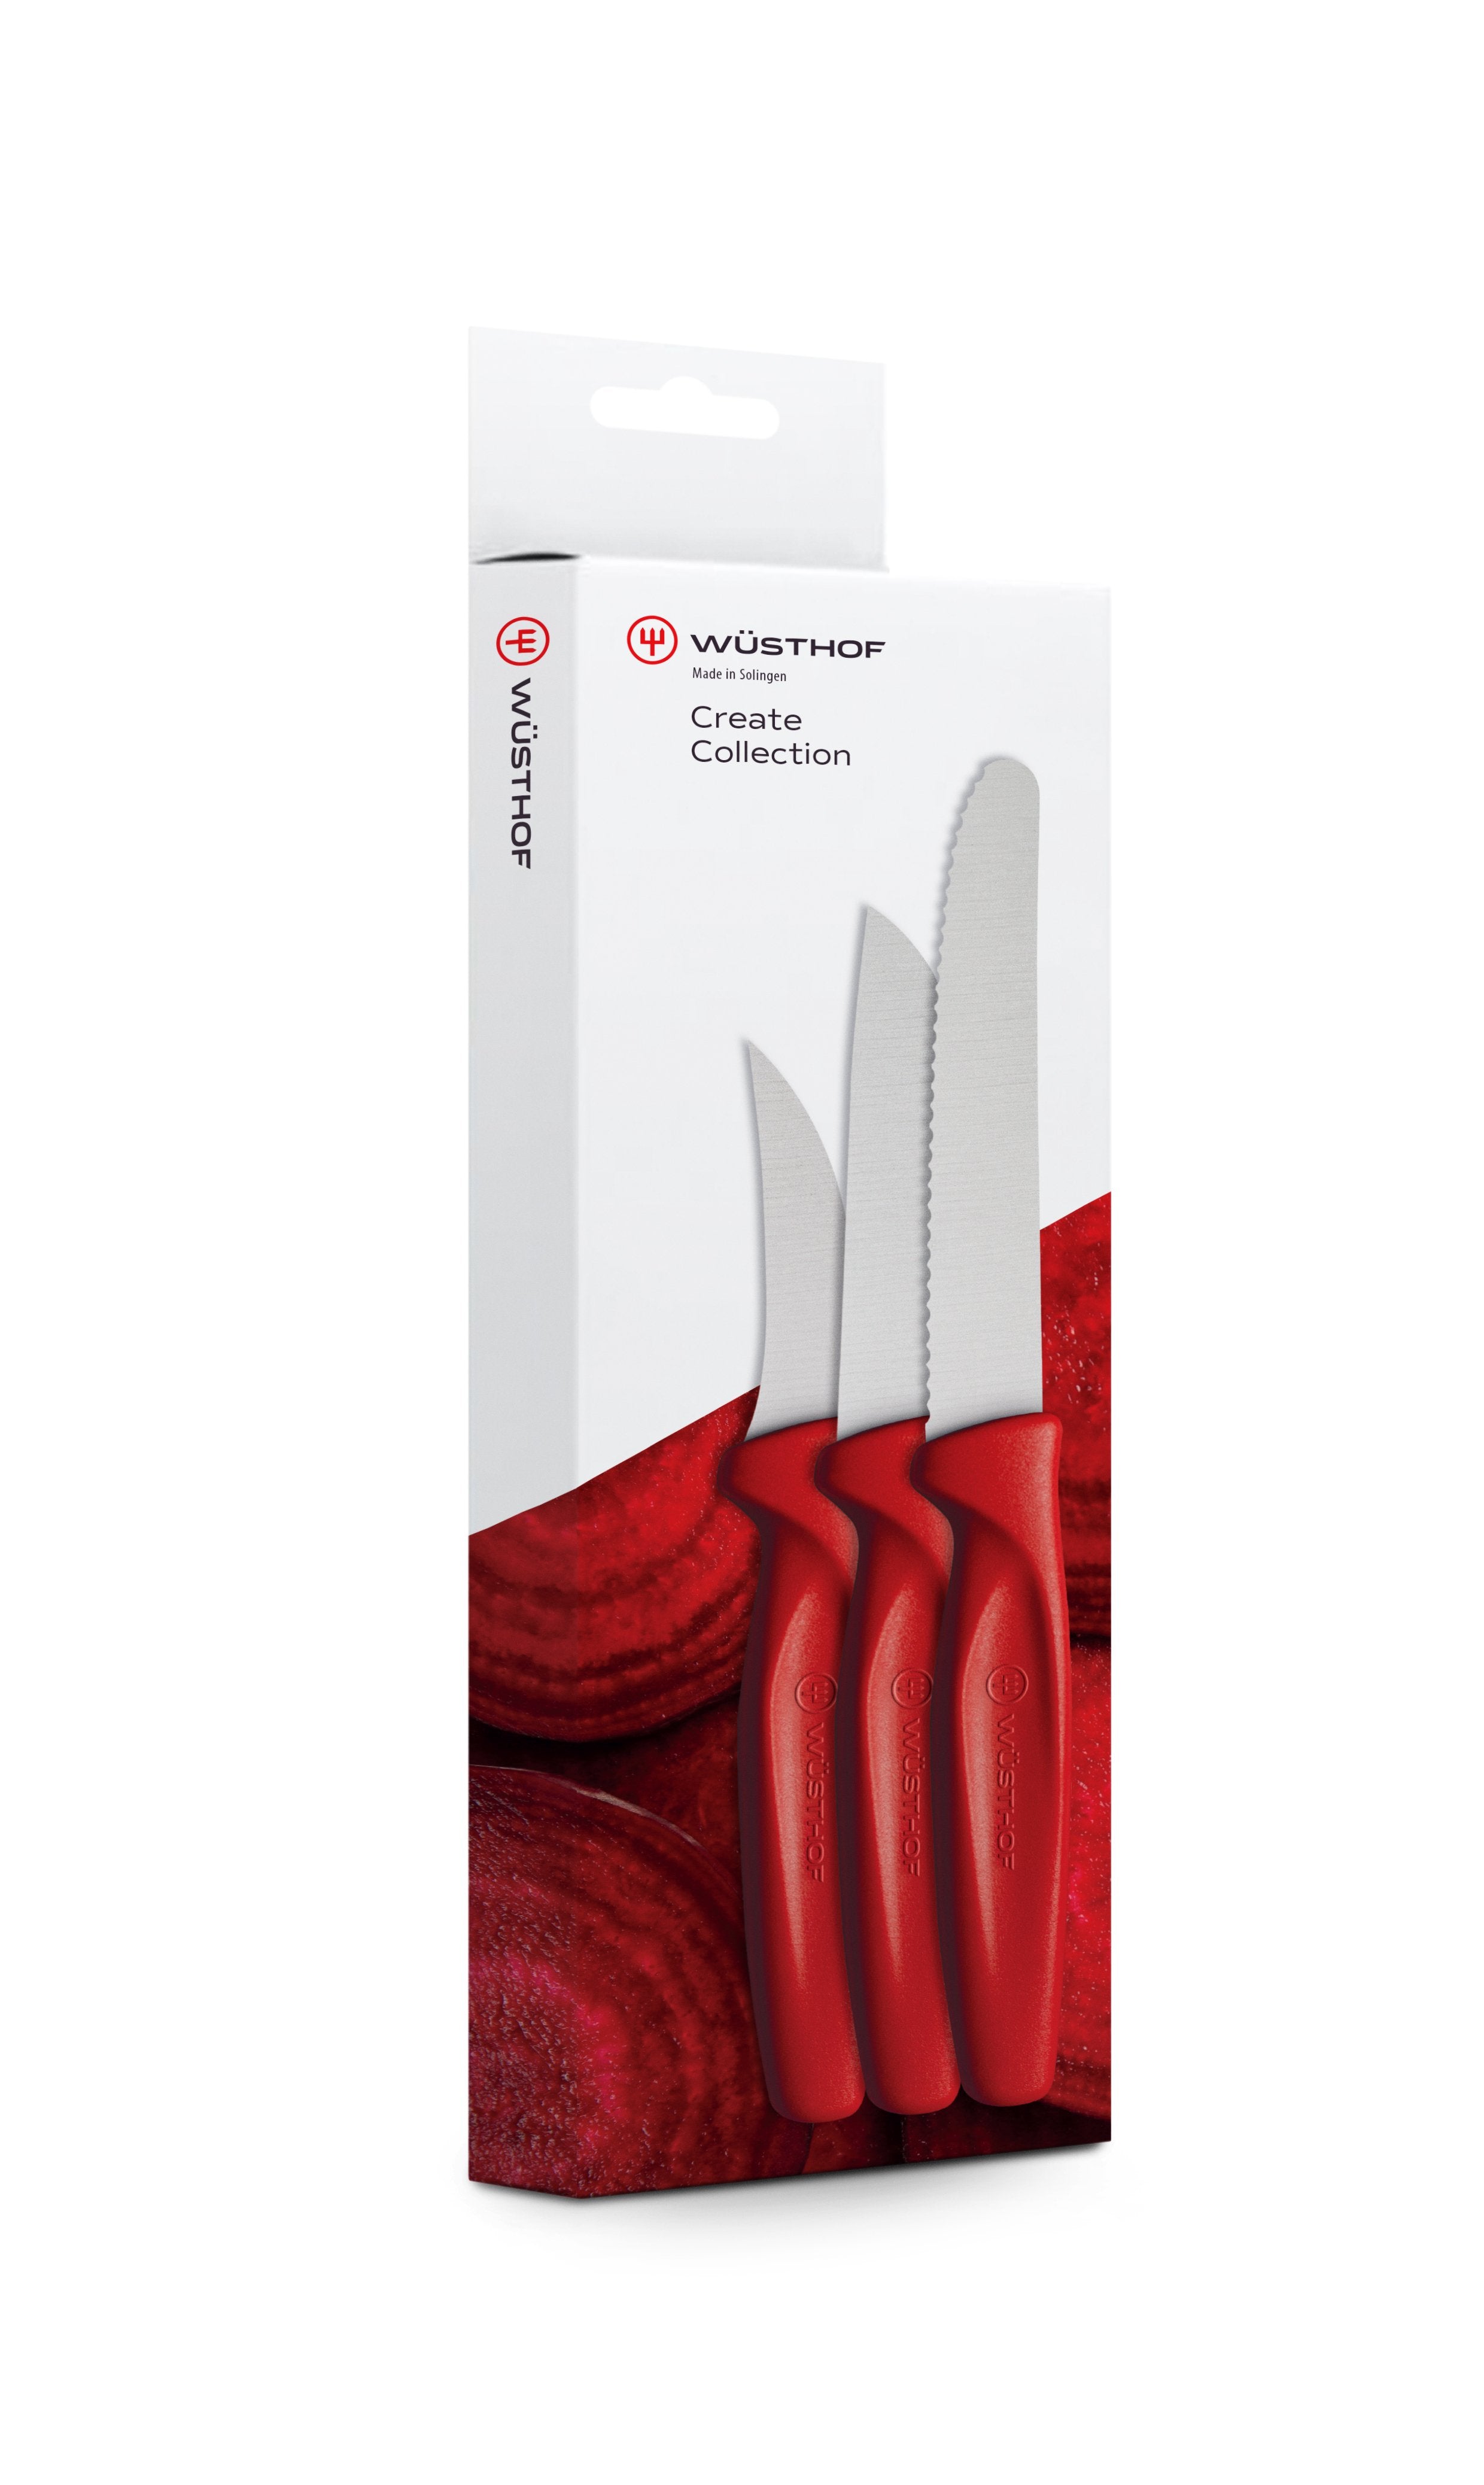 Victorinox Swiss Classic Paring Knife - Red - 3 in